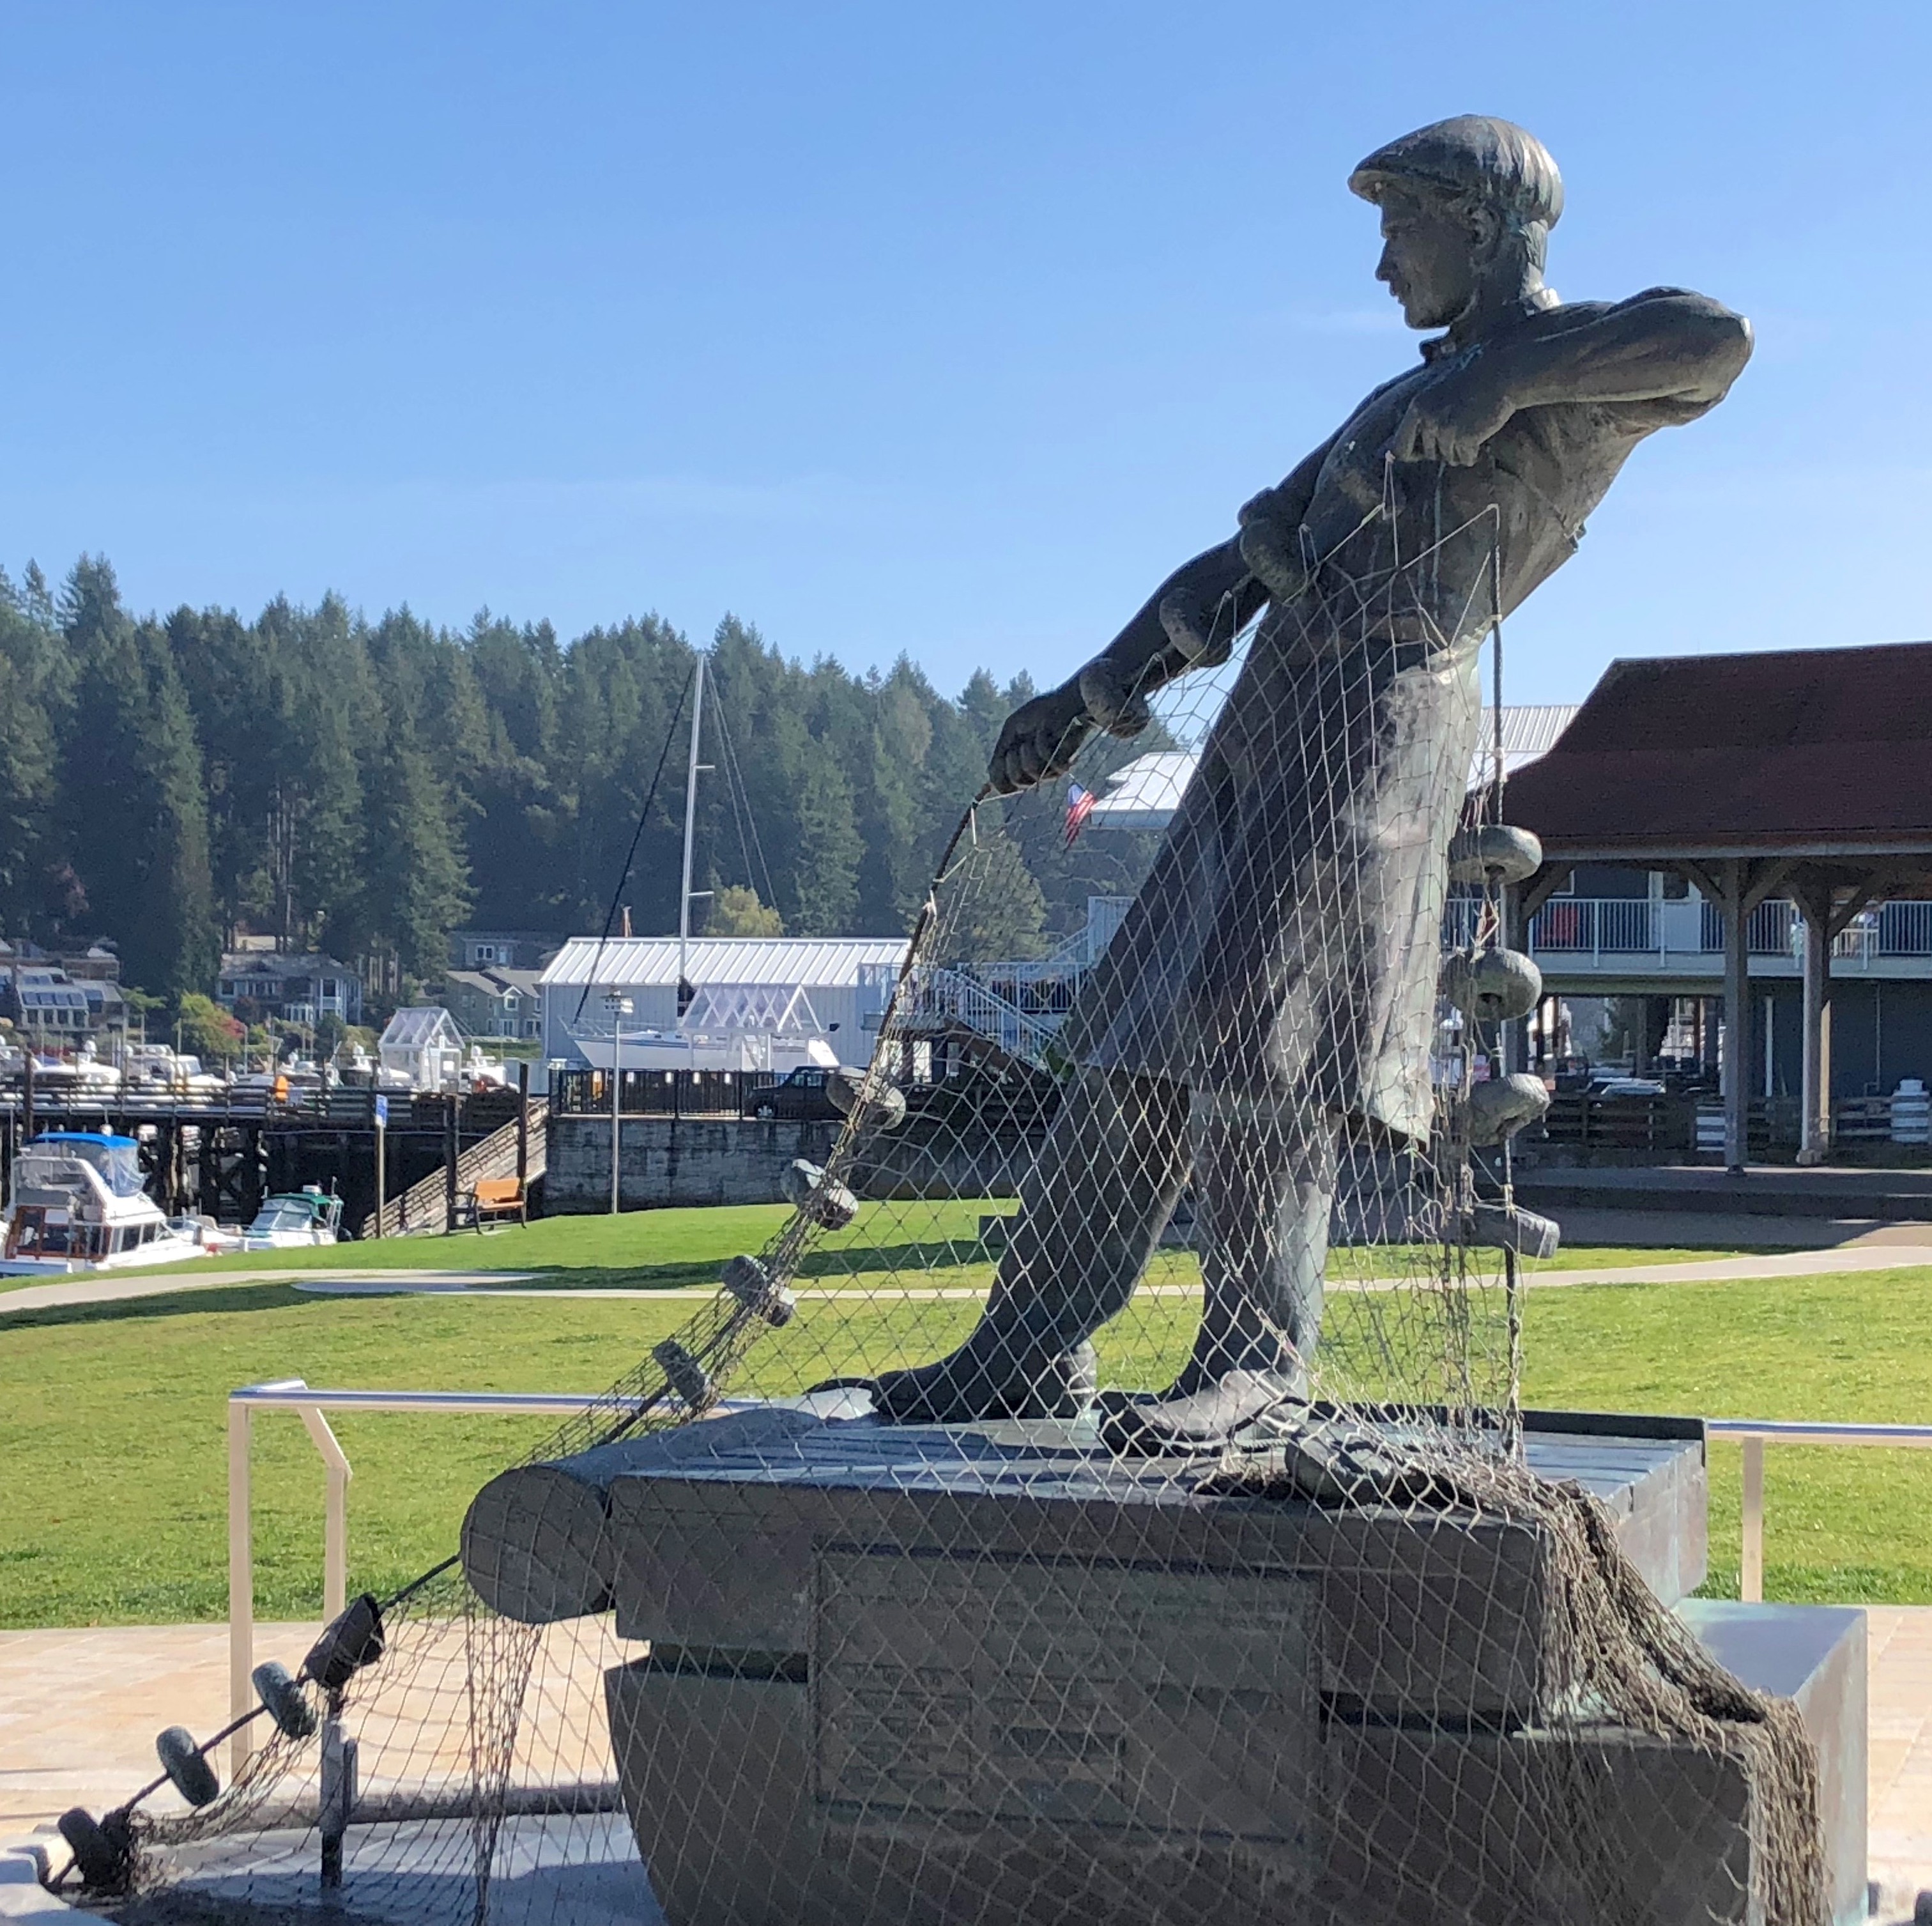 A statue at the park next door to Gig Harbor Marina shows a fisherman reeling in a net.